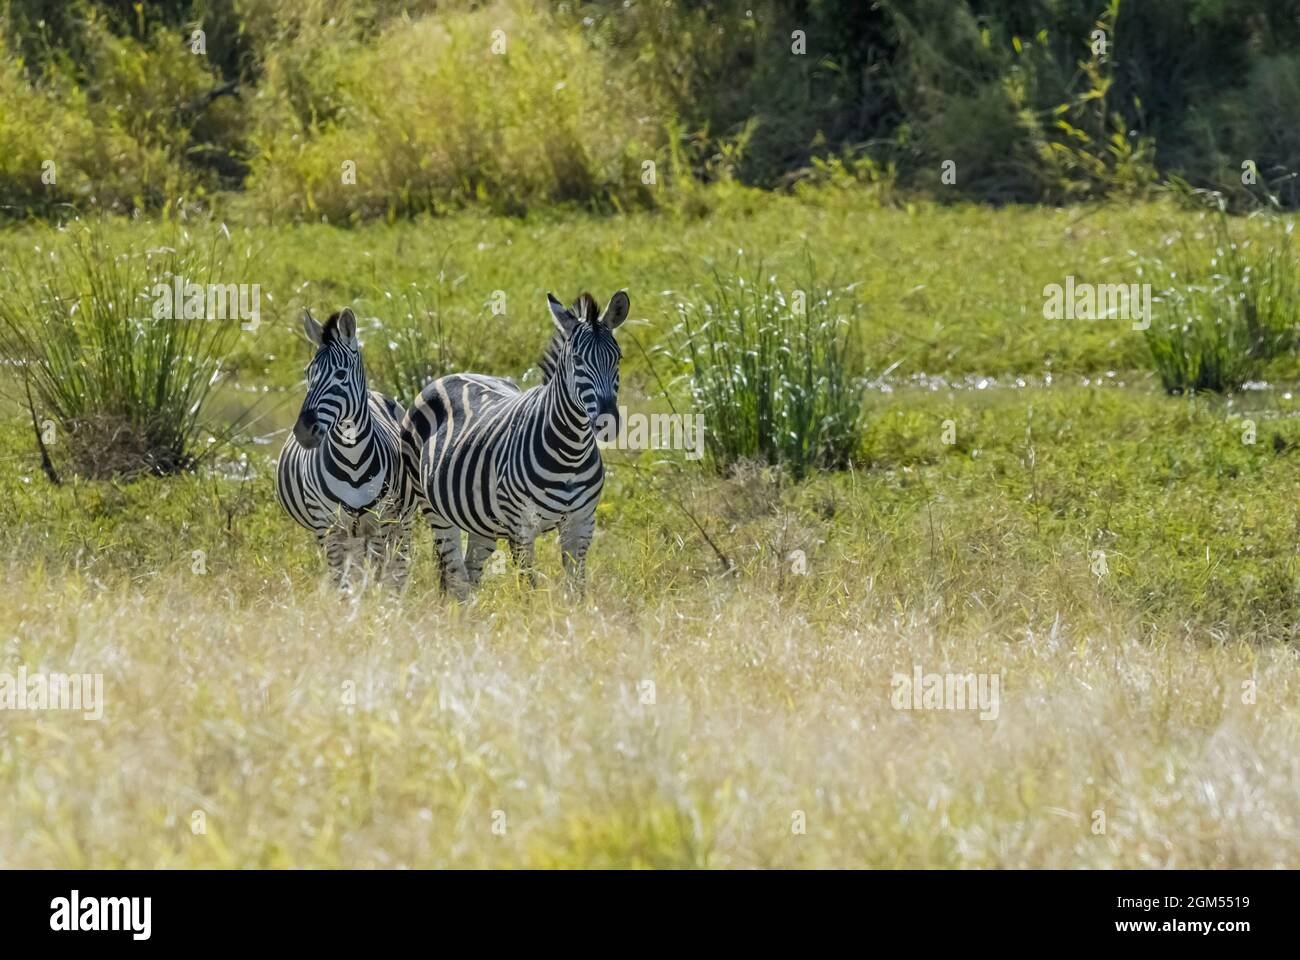 Zebra in Savannah environment, Kruger National Park, South Africa. Stock Photo